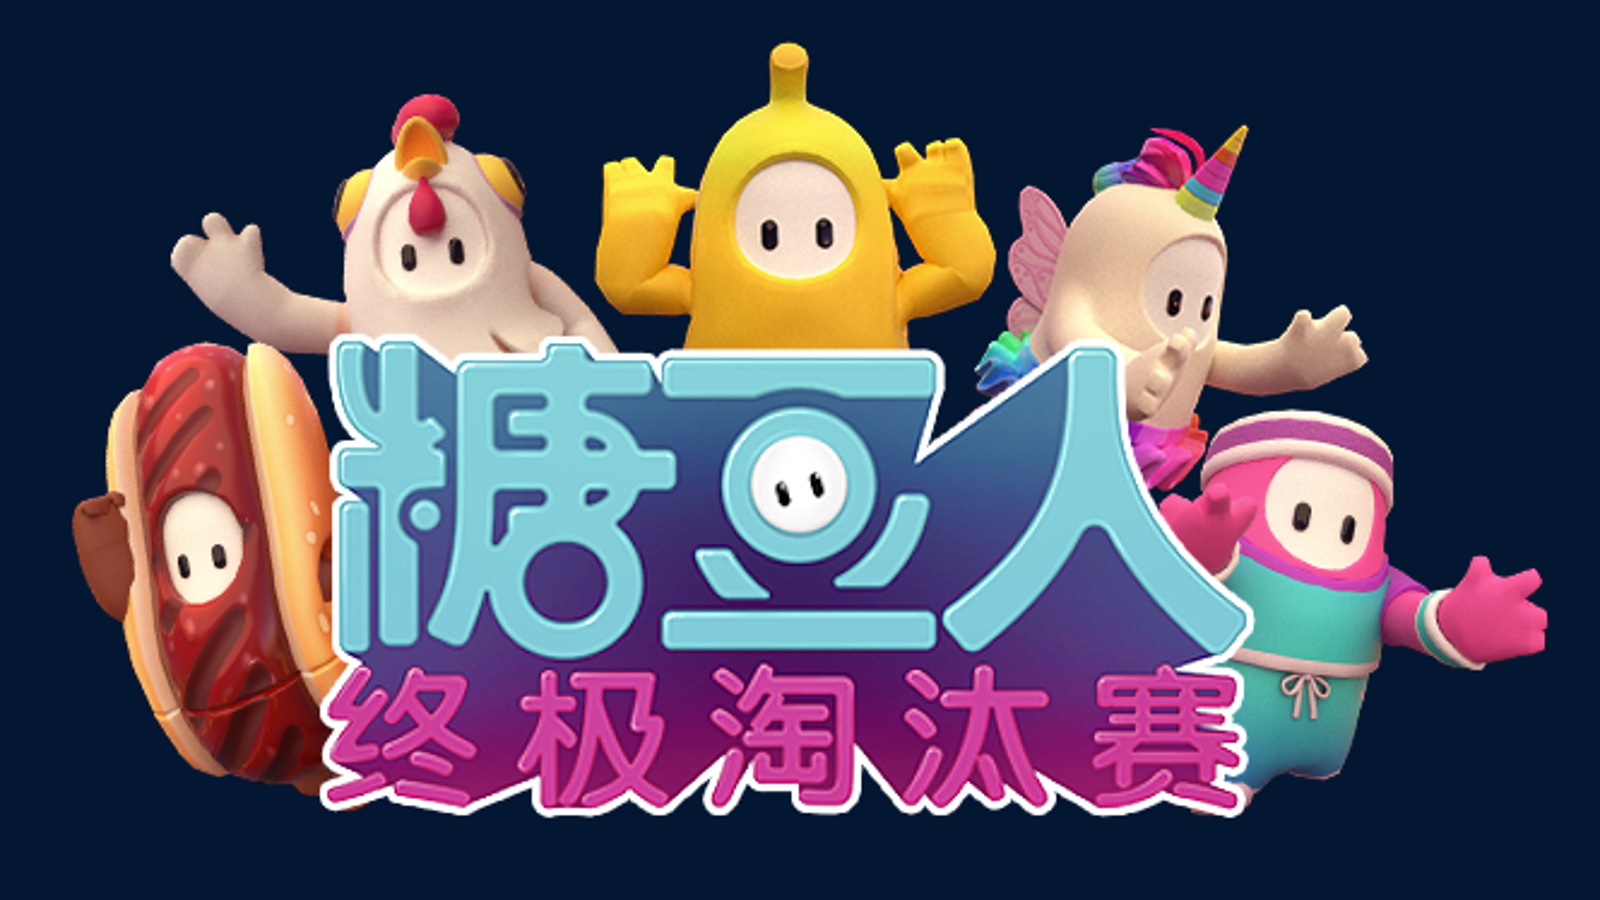 Fall Guys coming to Android in China - Gaming - MessengerGeek